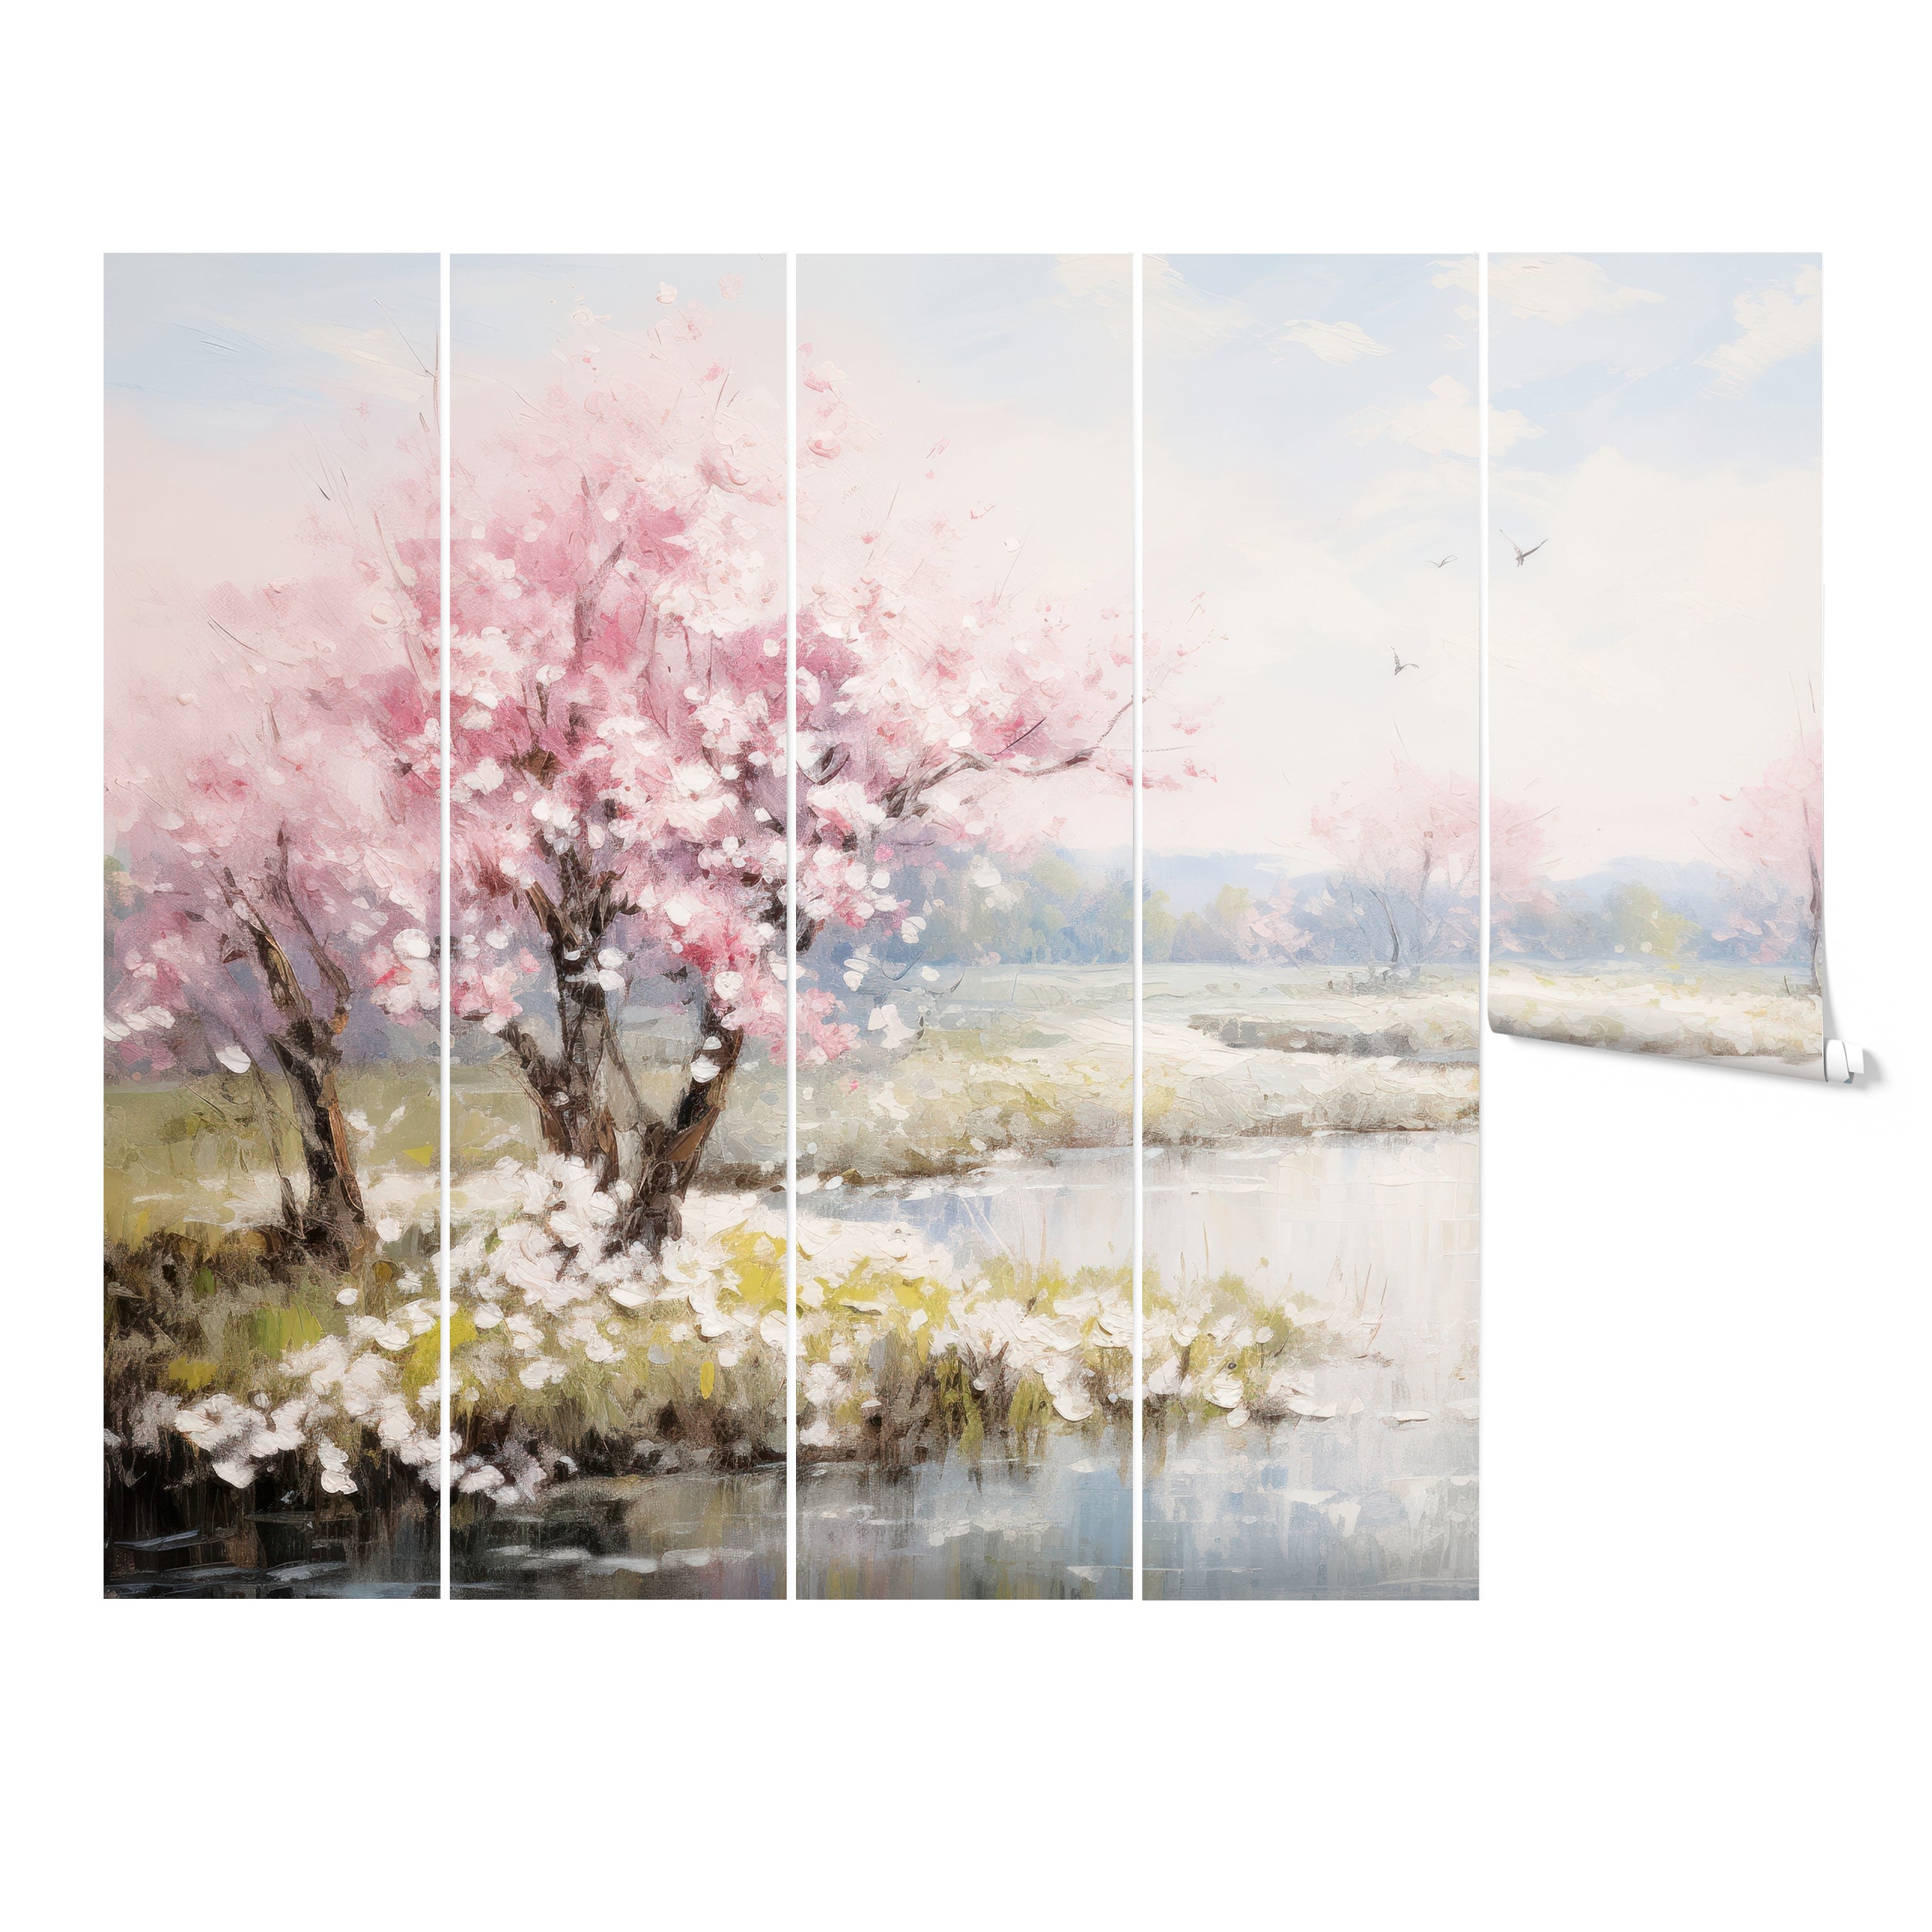 Cherry Lake Mural displayed in five rolls, showing pink cherry blossom trees and their reflections in a calm lake with a pastel sky backdrop.